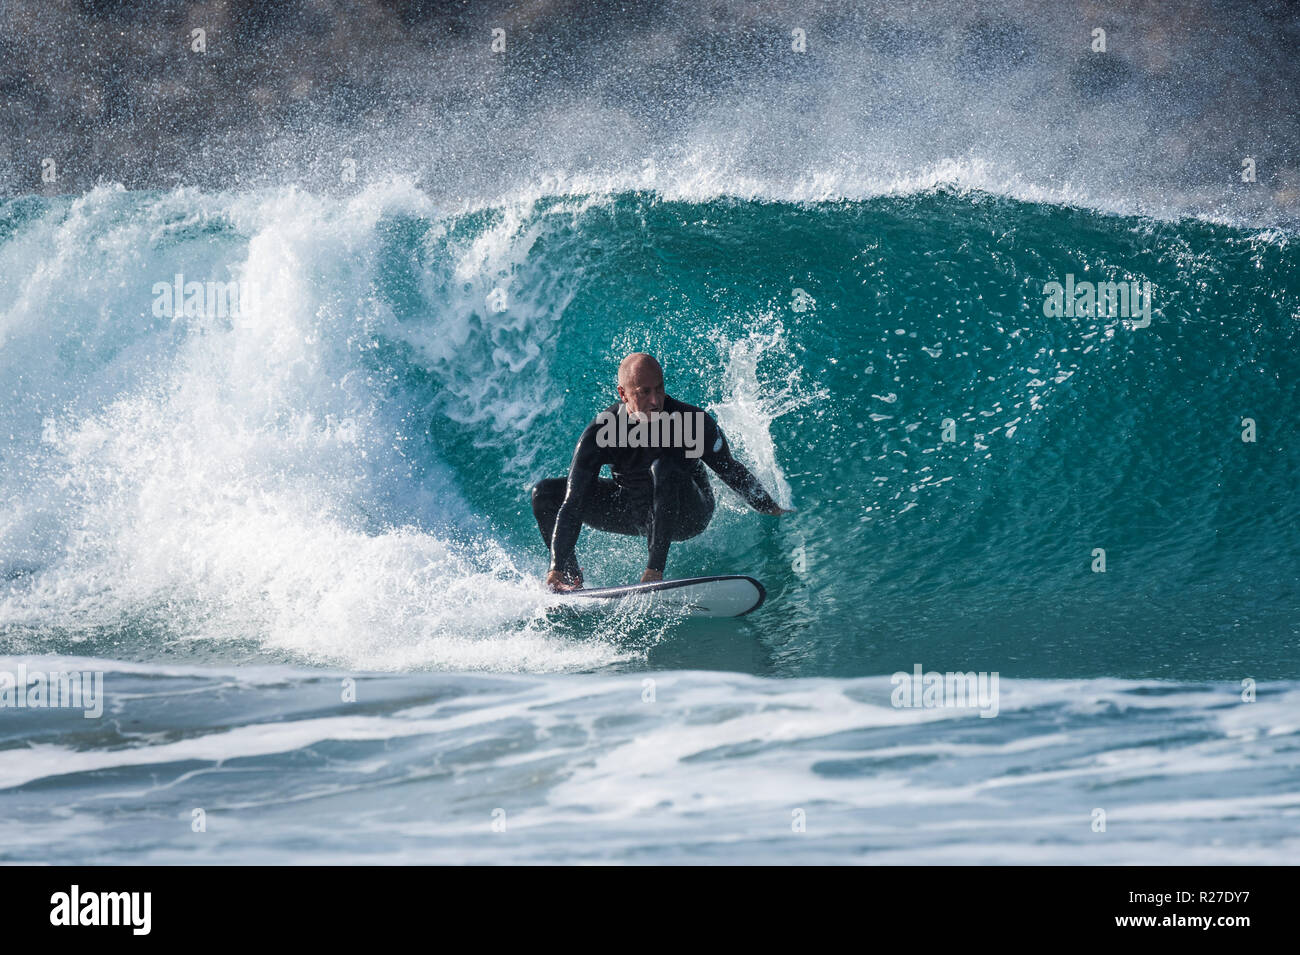 Surfer in action. Stock Photo